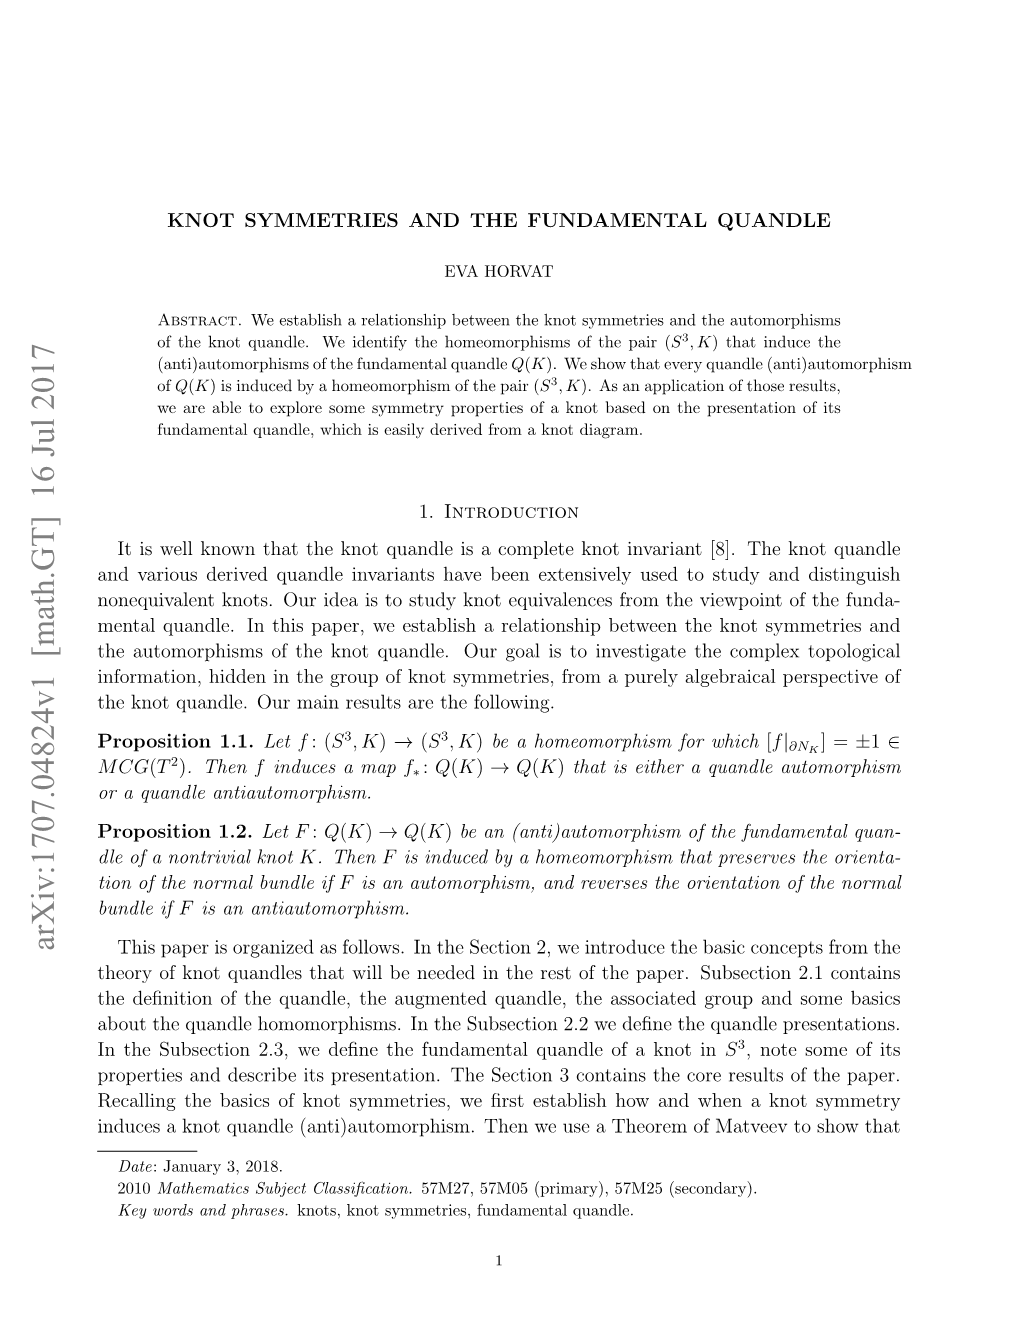 Knot Symmetries and the Fundamental Quandle